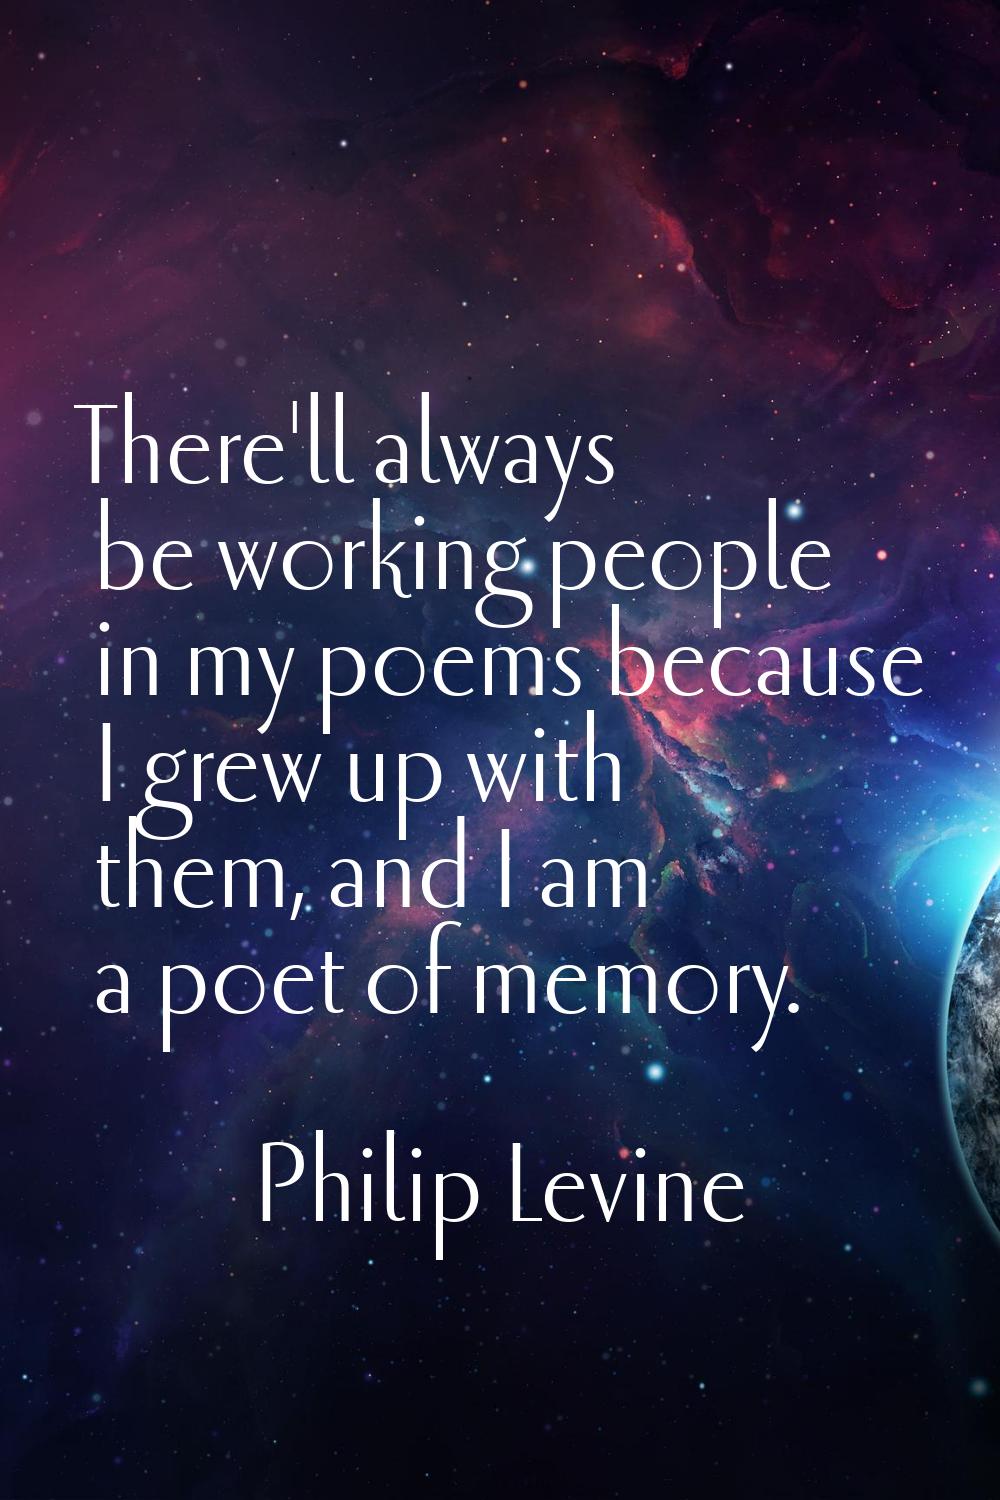 There'll always be working people in my poems because I grew up with them, and I am a poet of memor